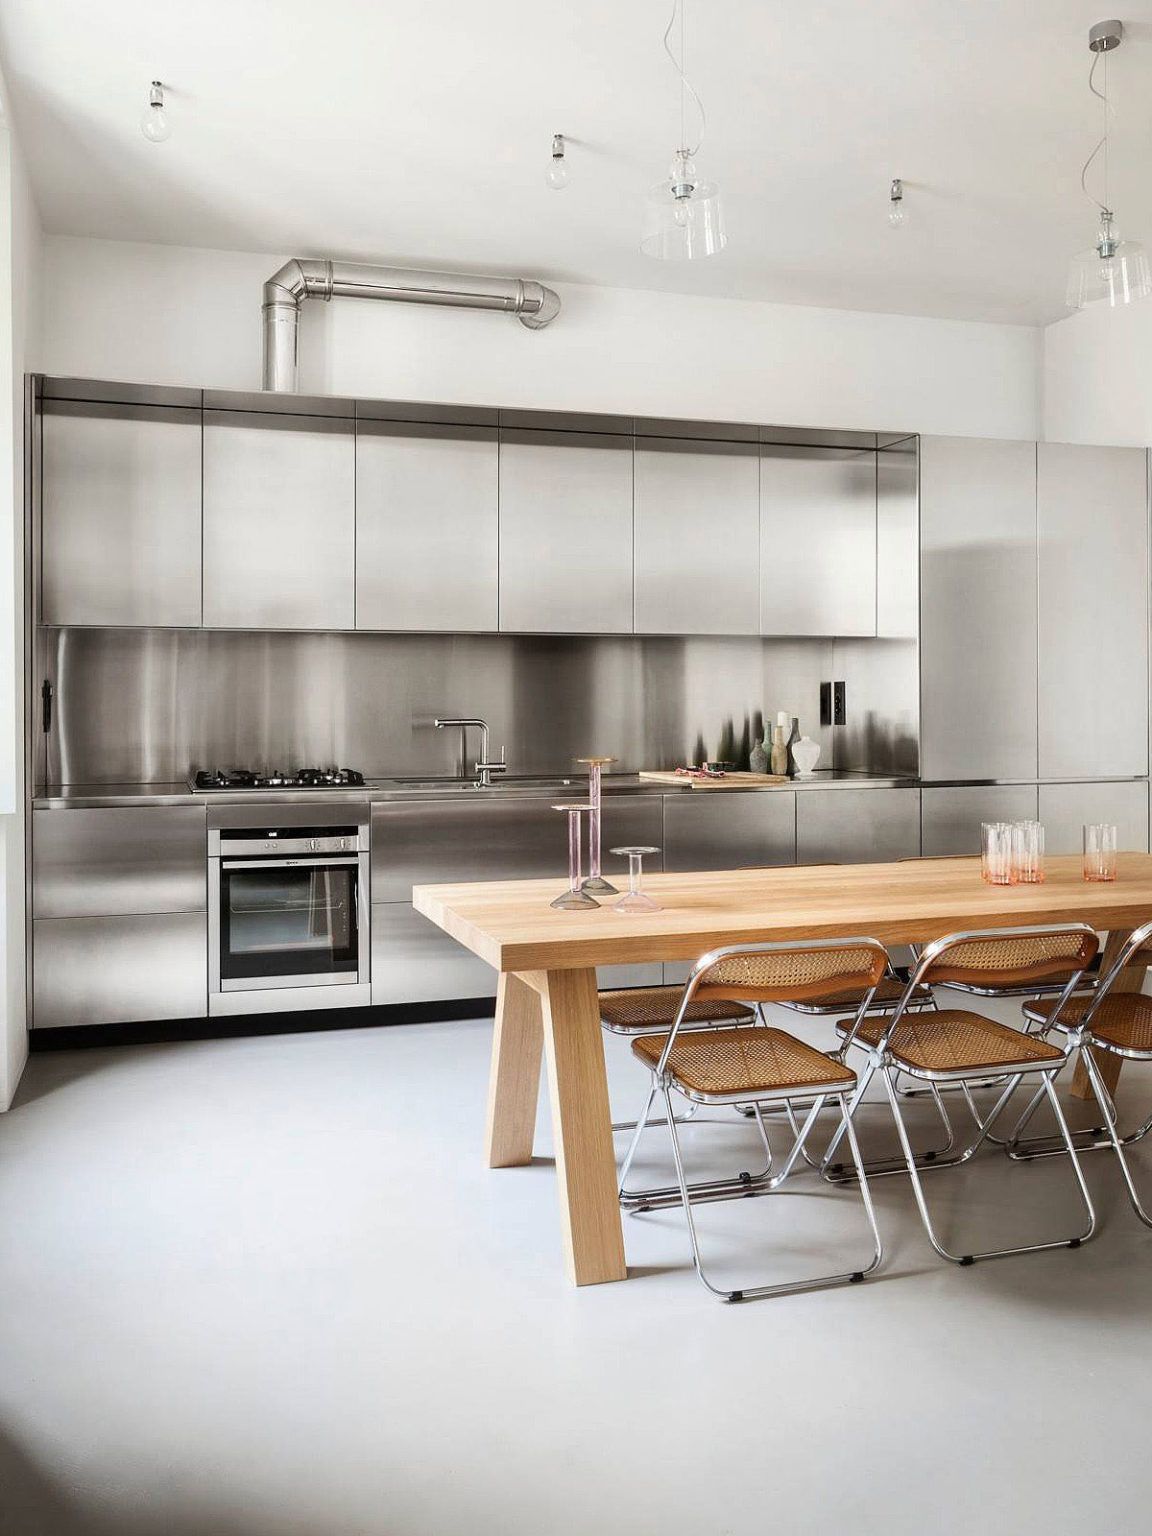 The Modern Elegance of Stainless Steel Kitchen Cabinets